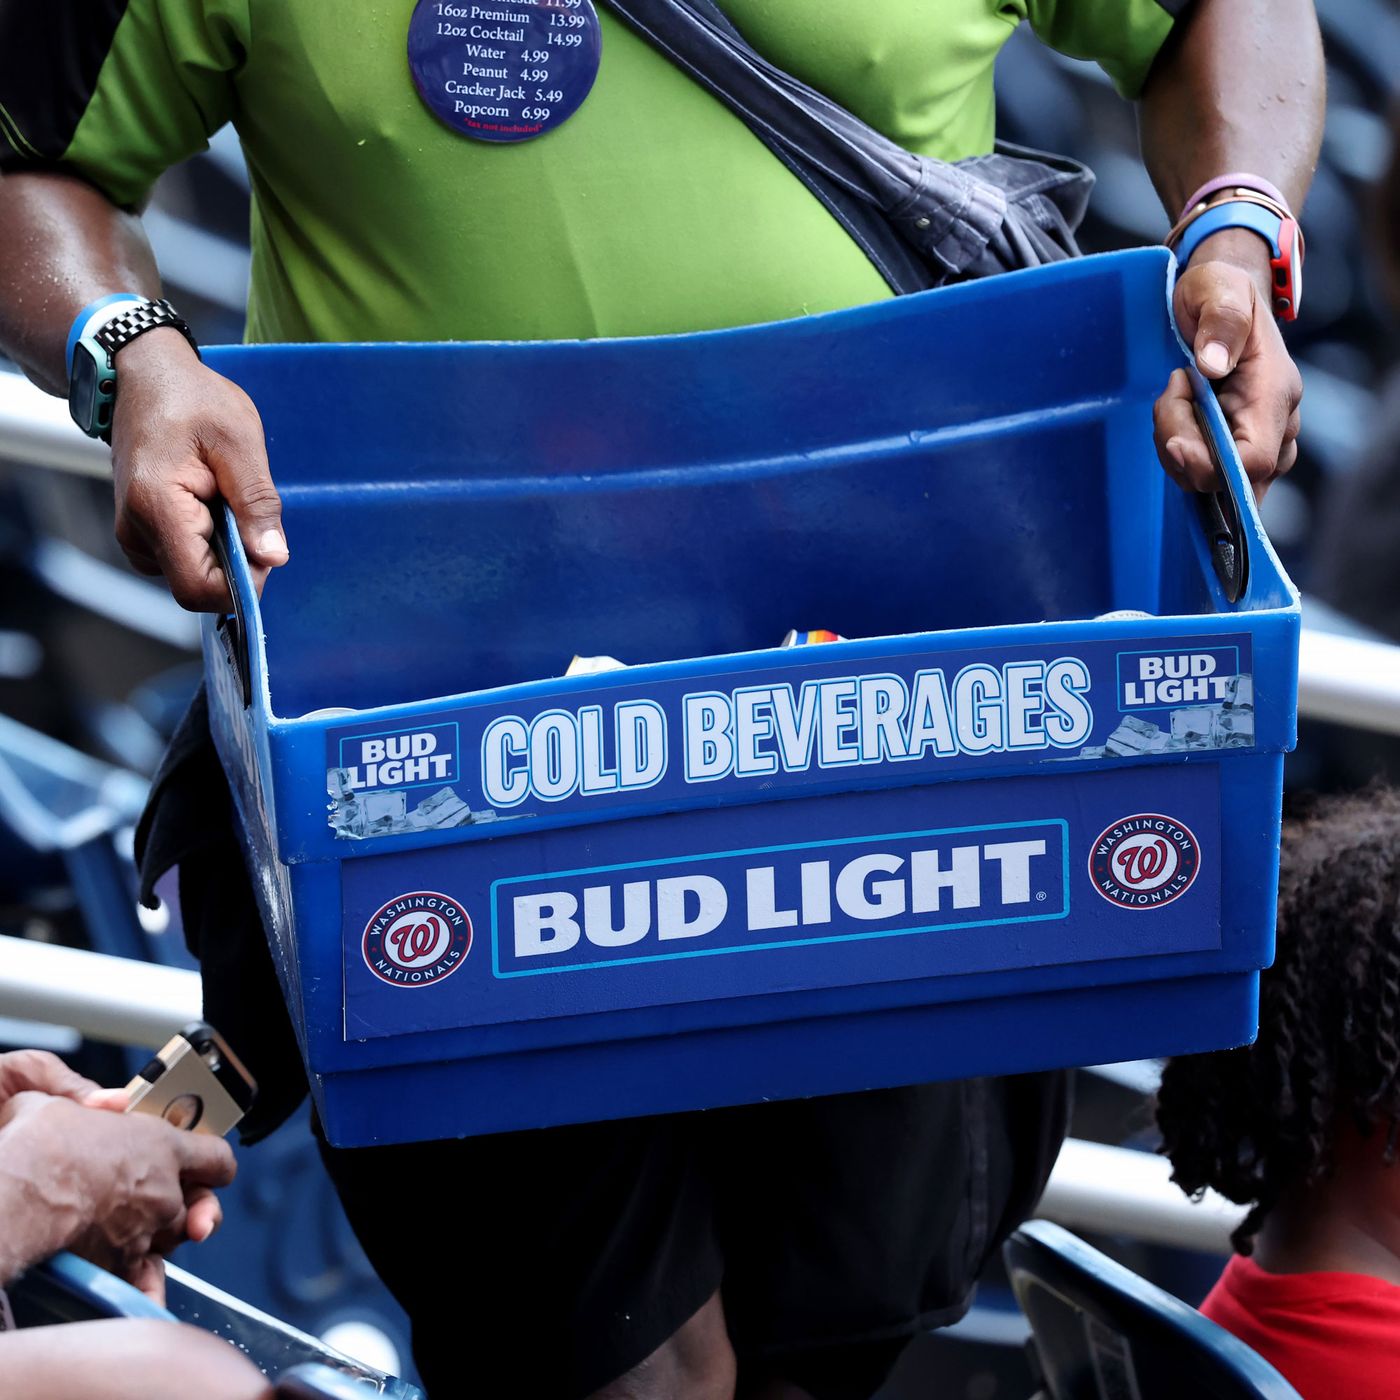 What Makes the Bud Light Boycott Different